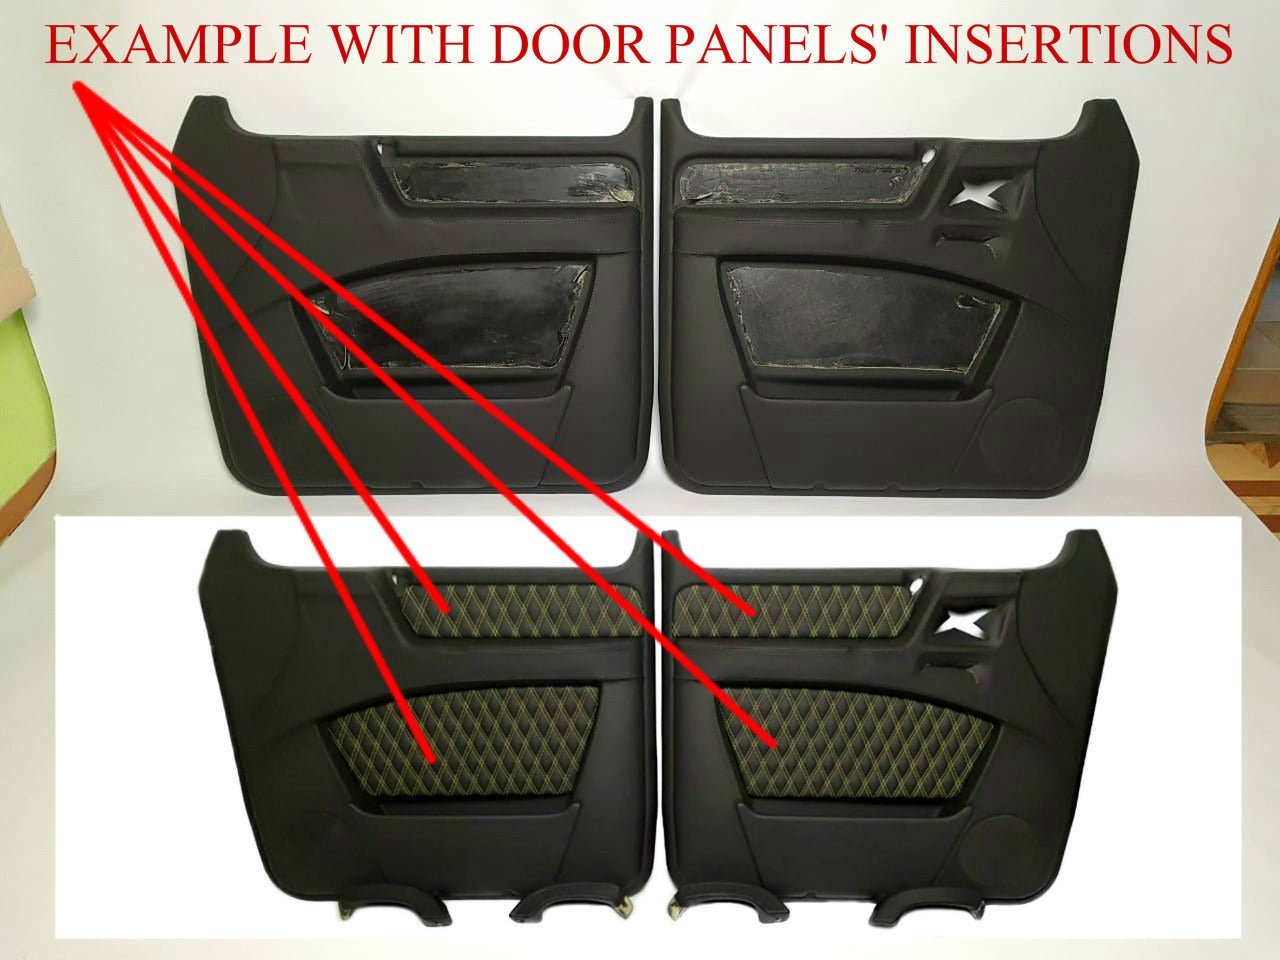 Interior door panels without lether inserts for Mercedes-Benz W463 G-Wagon 1979 - 2001